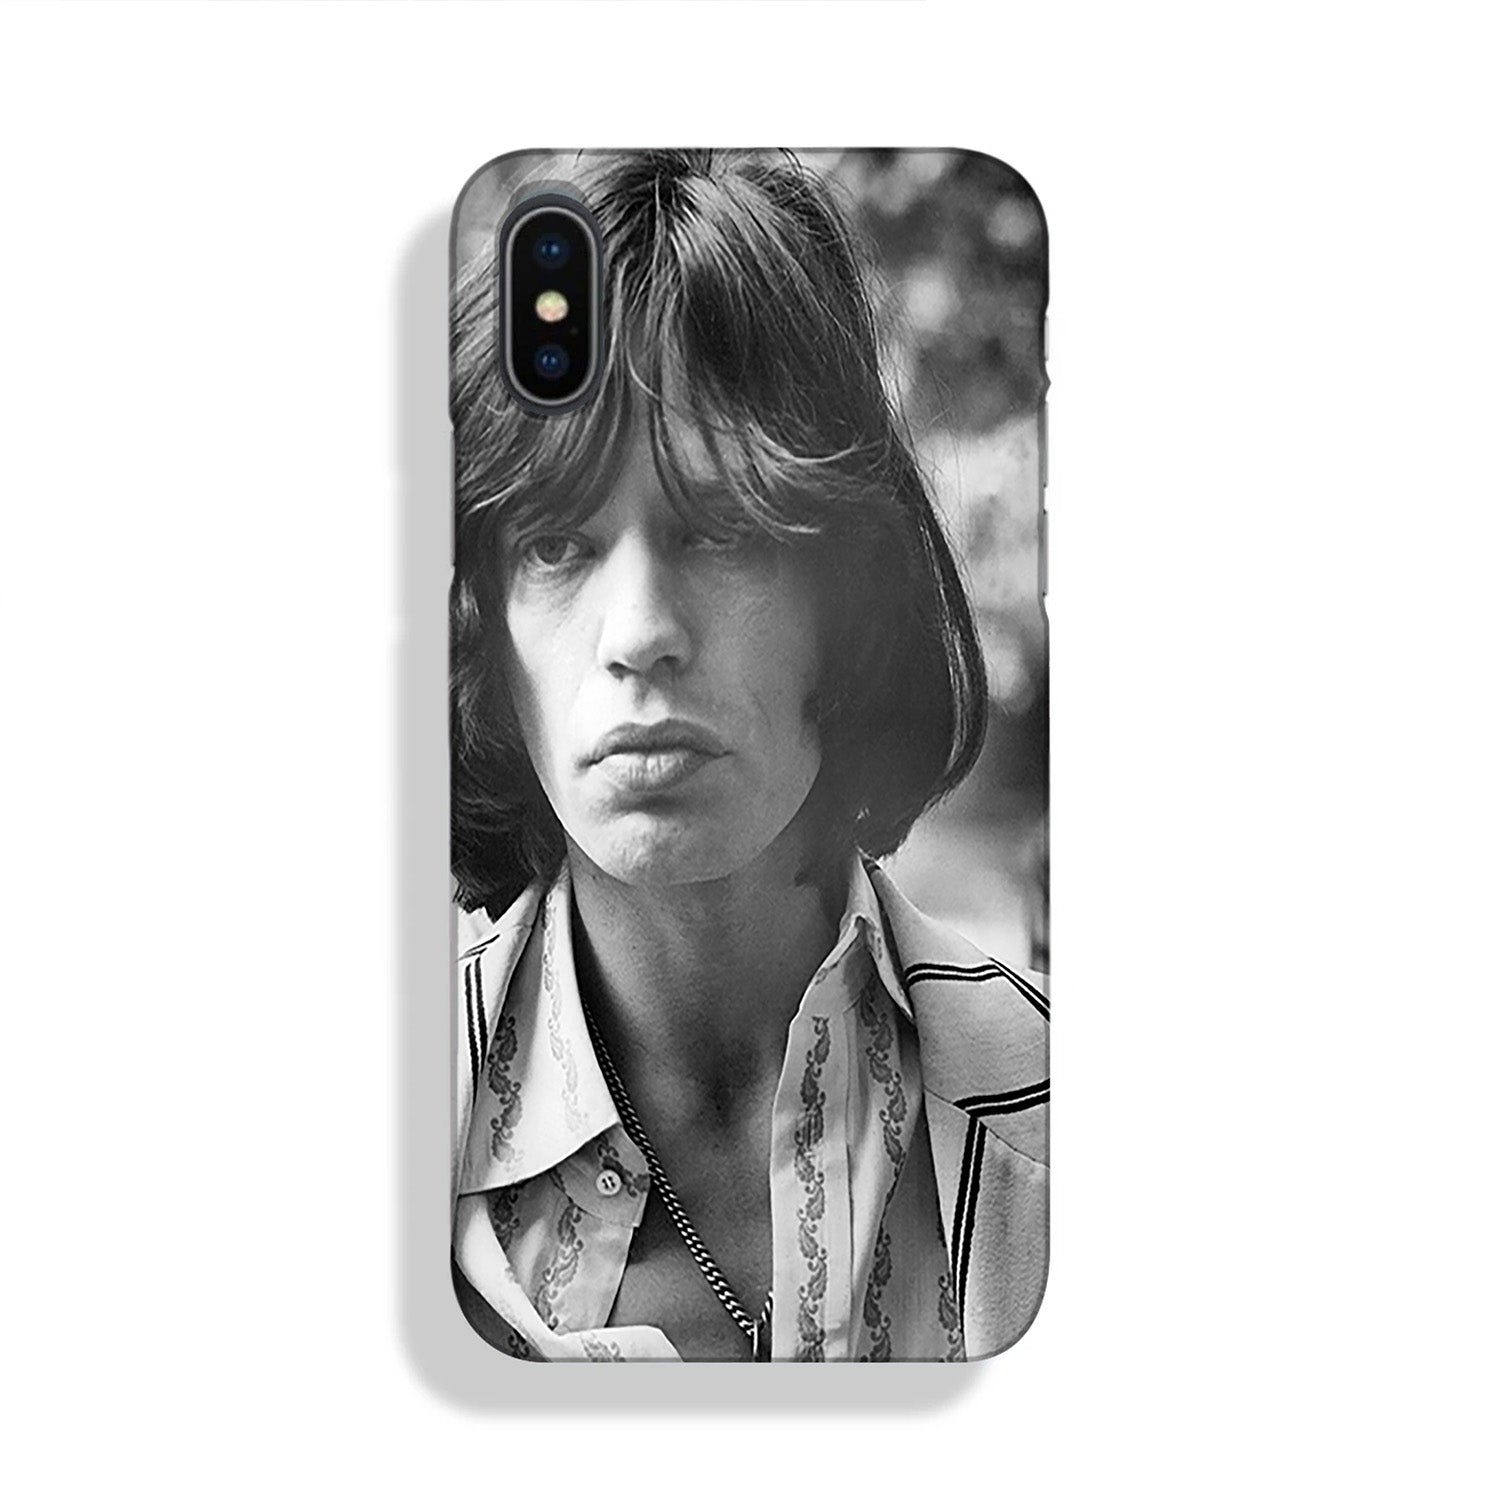 Mick Jagger in 1969 Phone Case iPhone XS Max